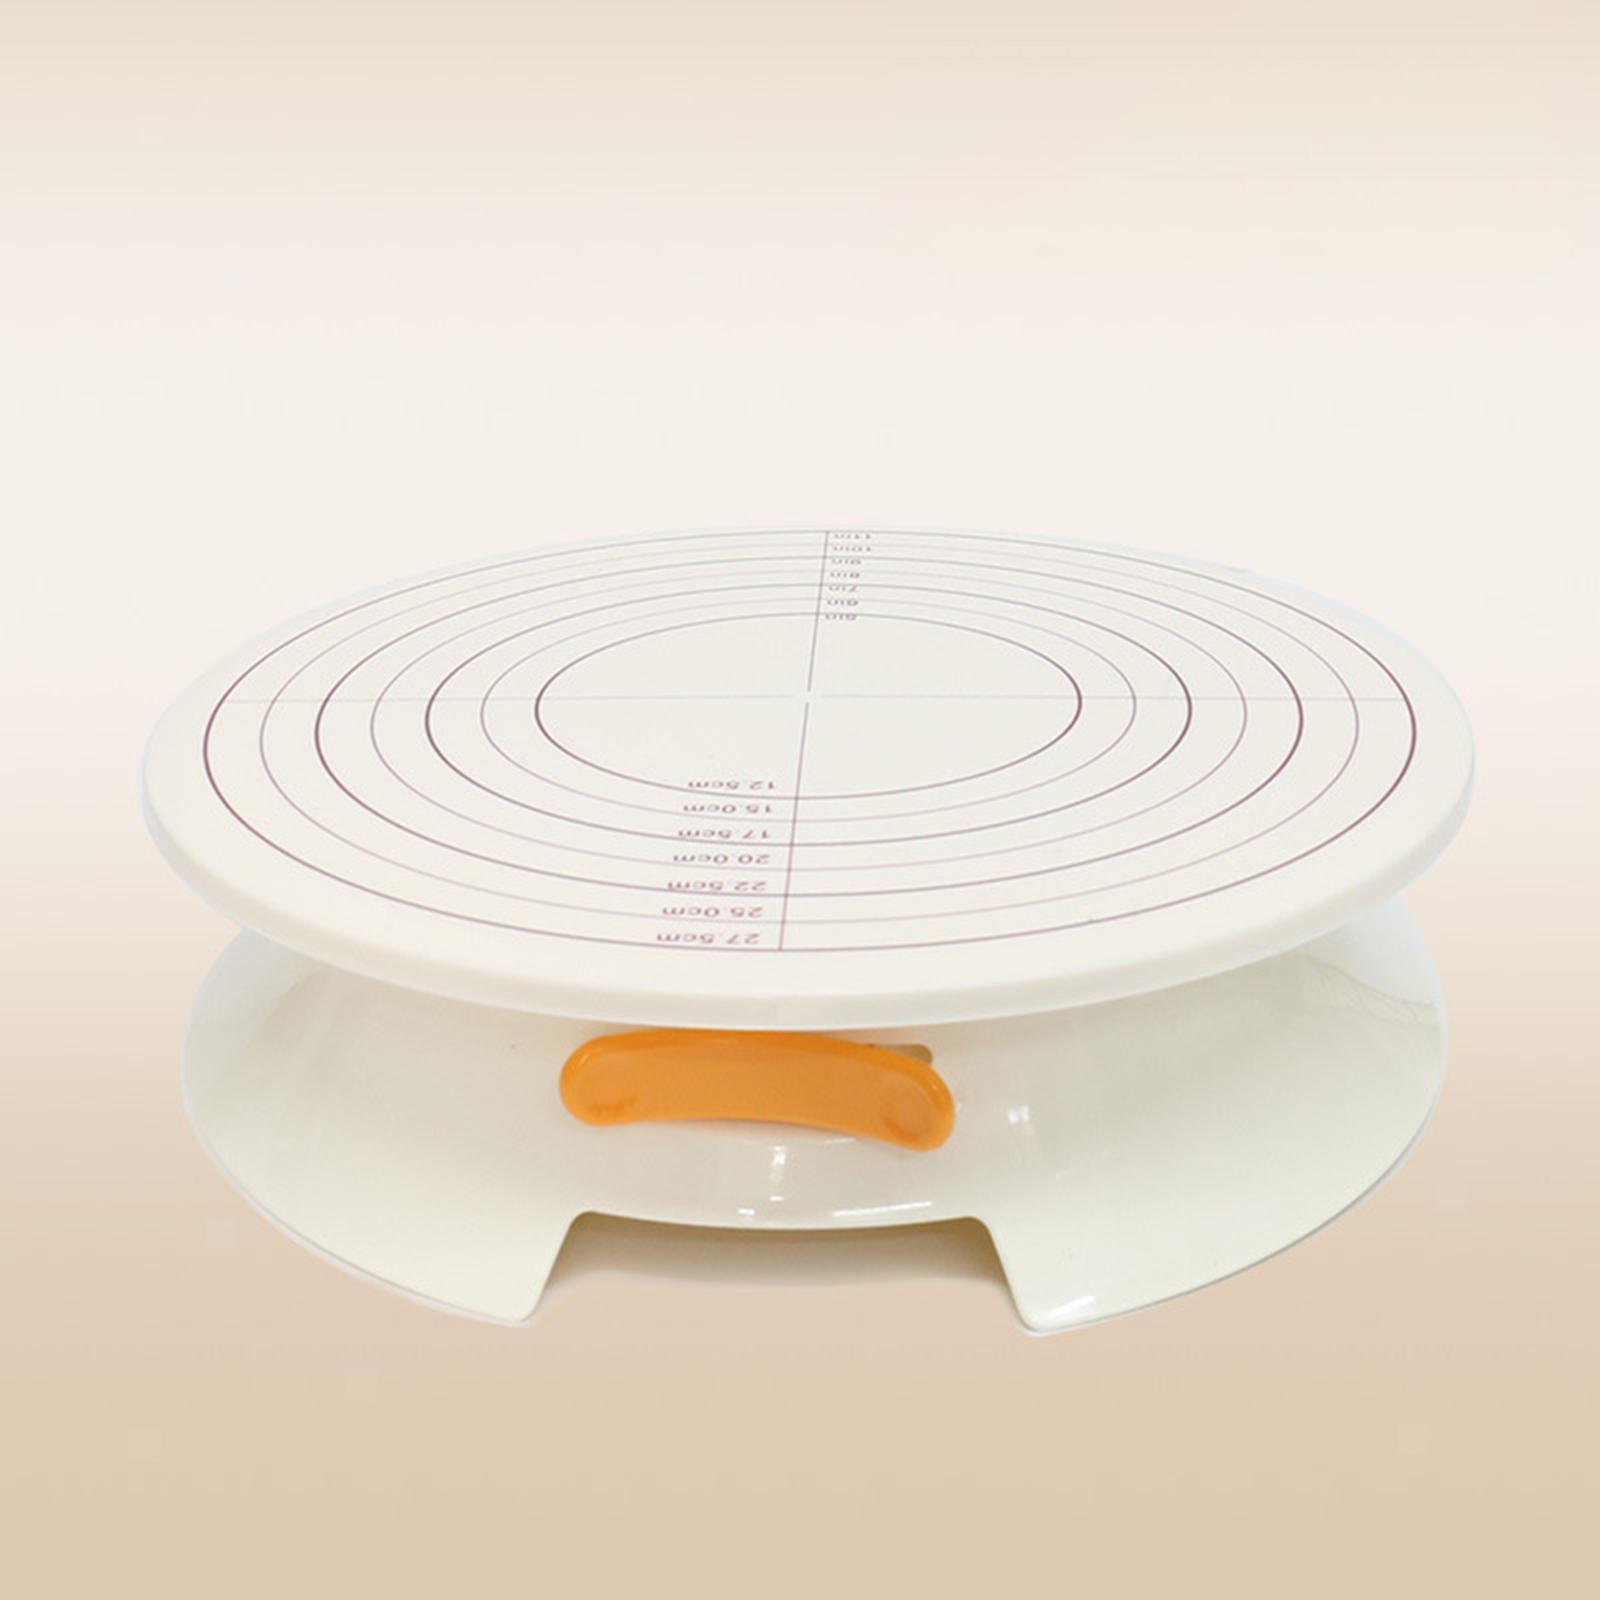 Anti Skid Round Cake Table Rotating Cake Stand Cake Turntable For Decorating